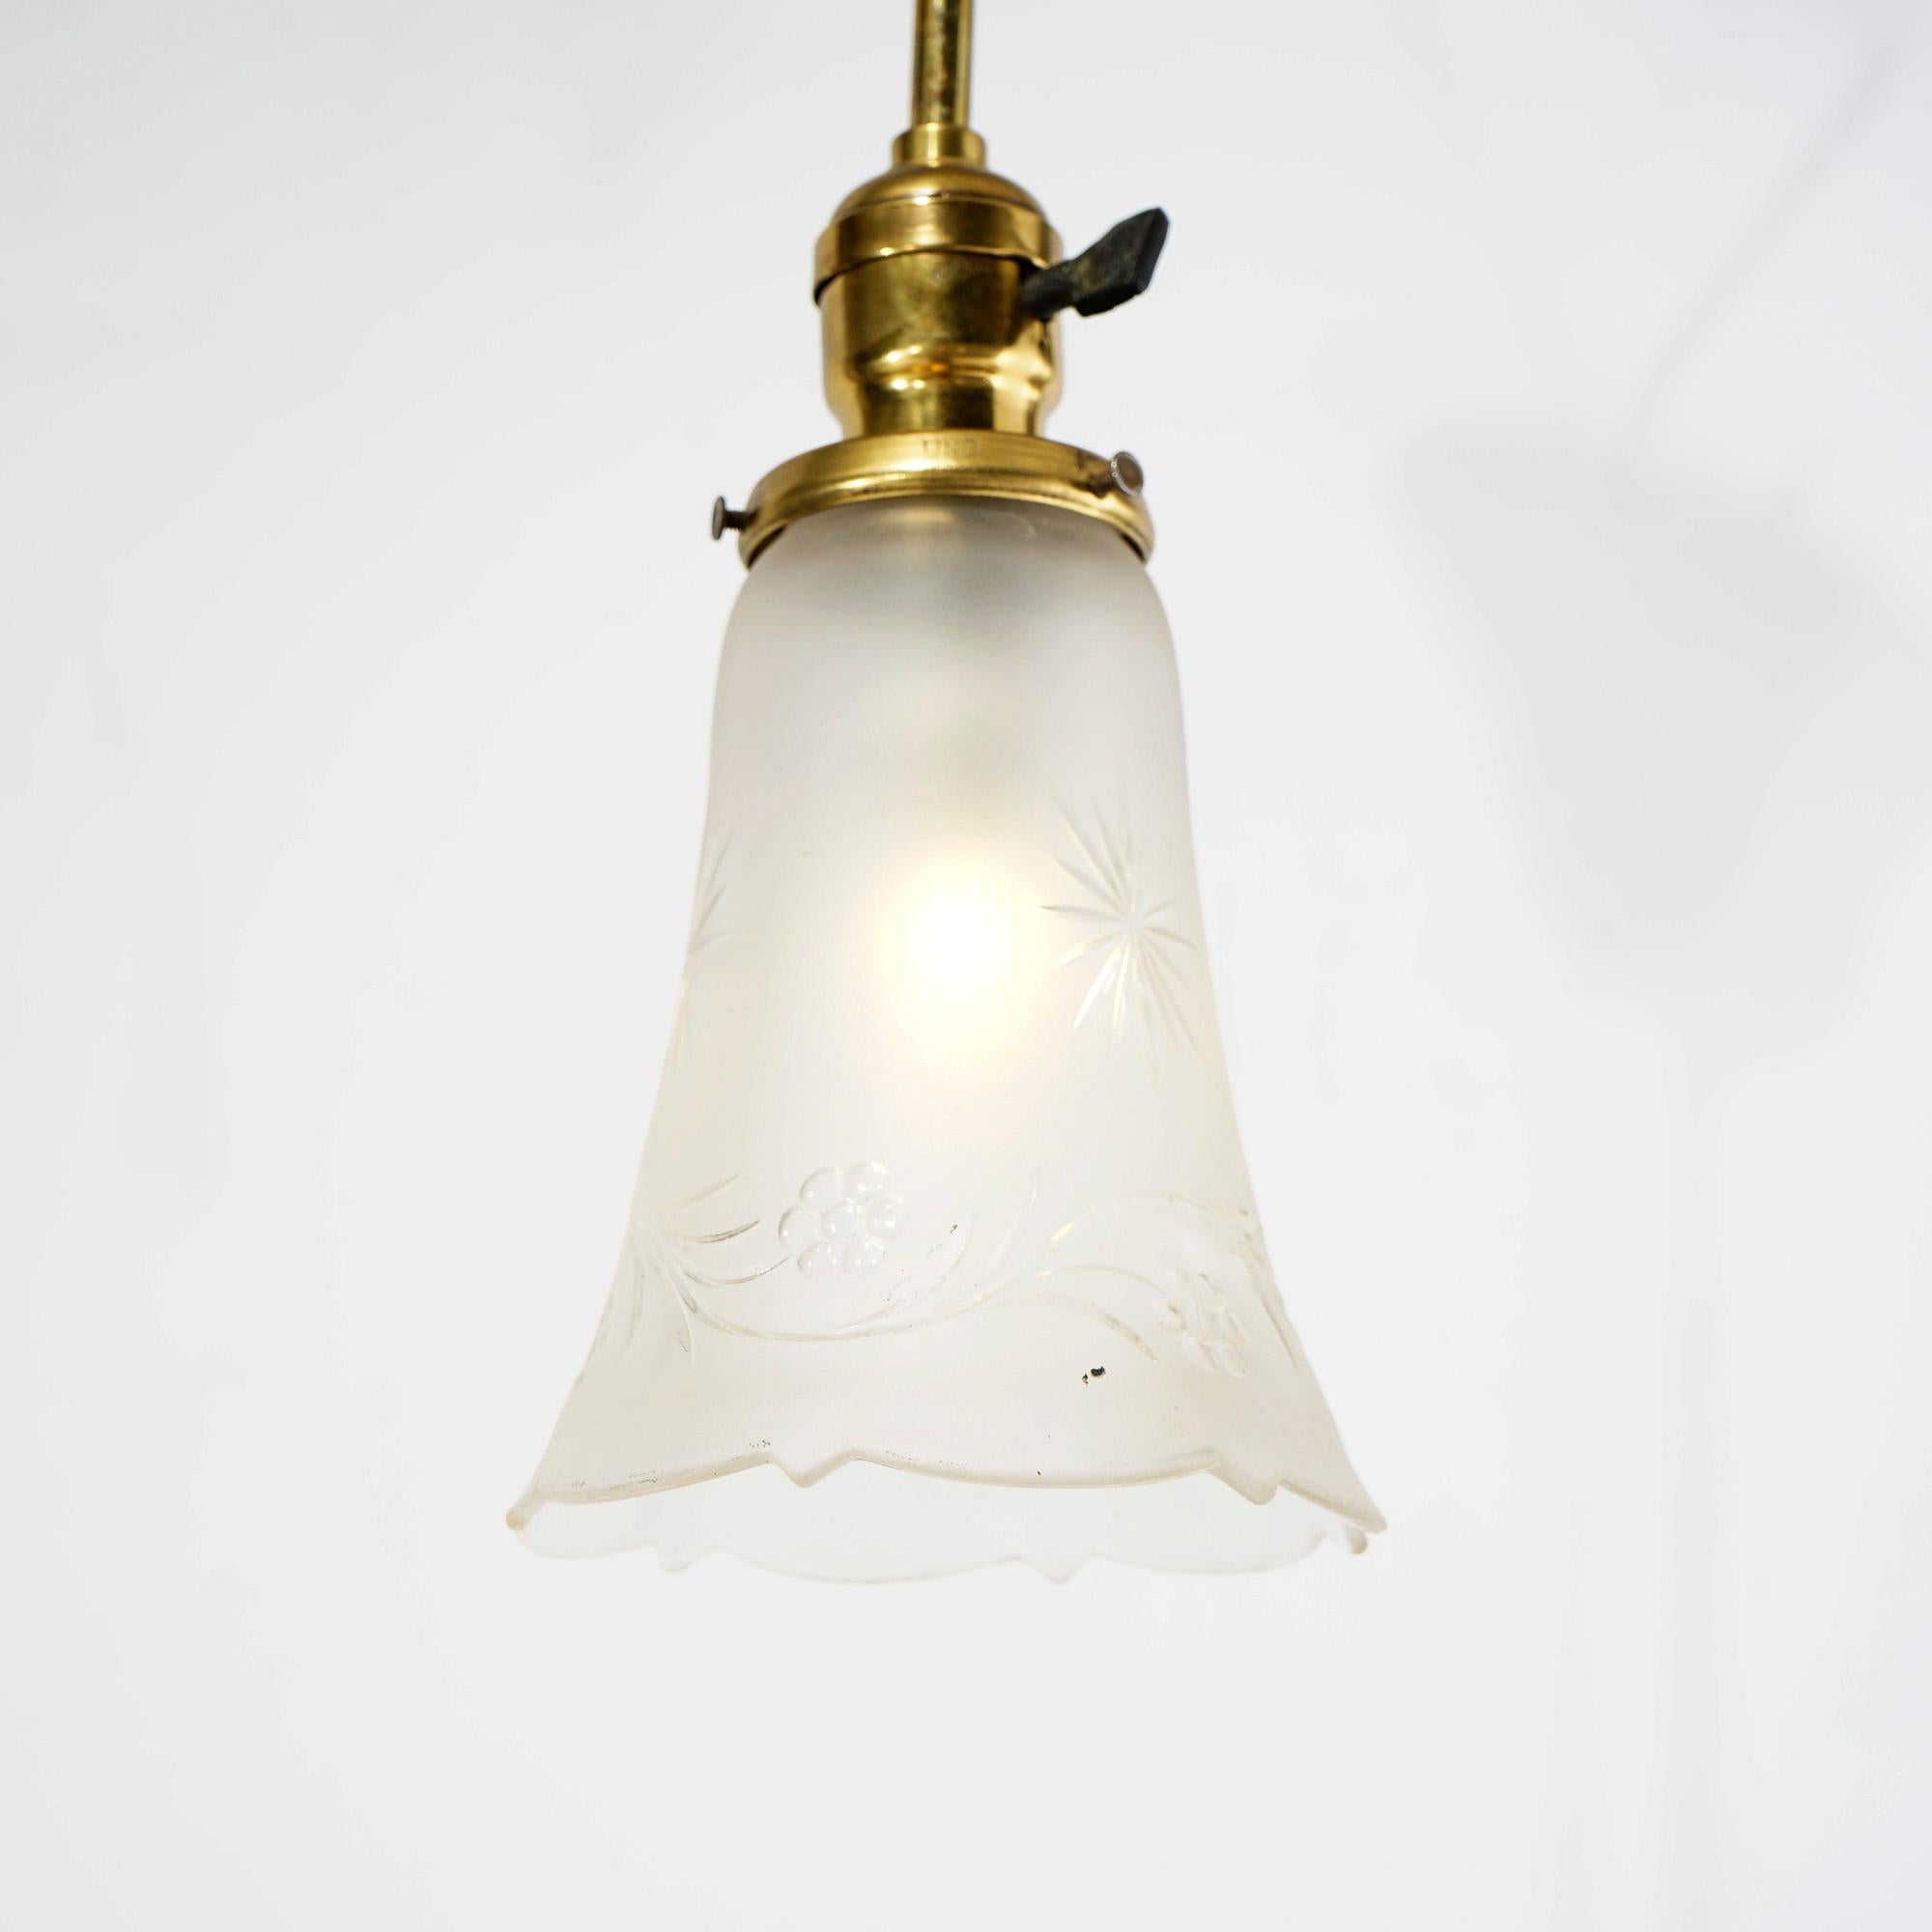 Antique Brass Hanging Hall Light Fixture Circa 1920 For Sale 1